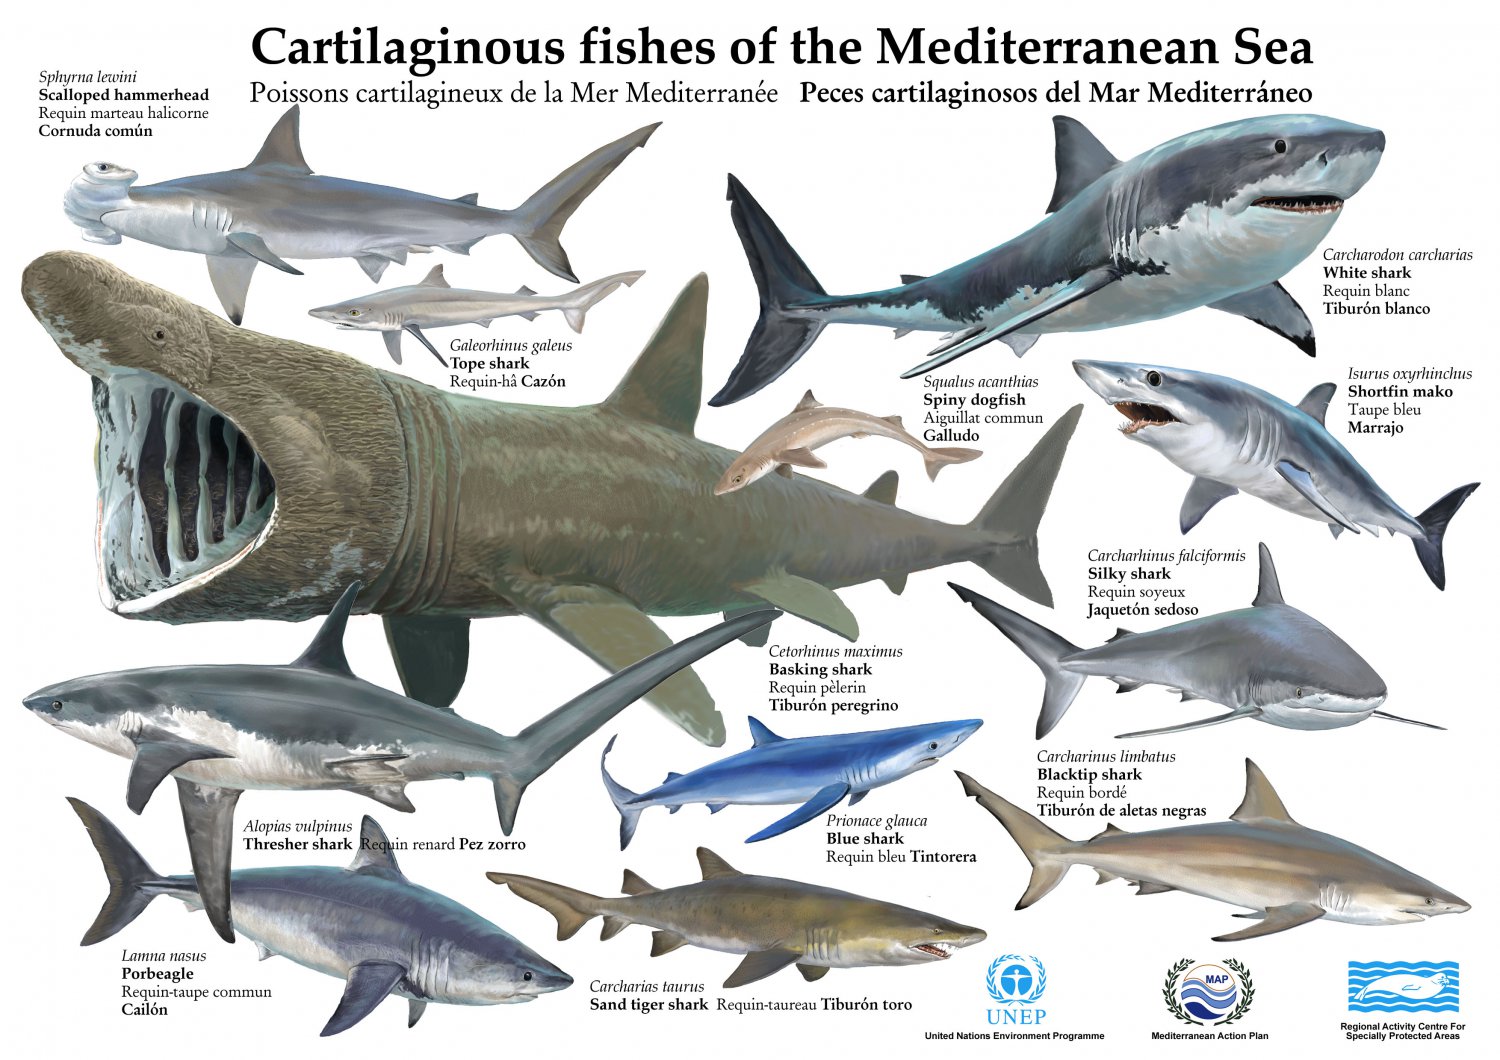 Cartilaginous Fishes of the Mediterranean Sea Chart  18"x28" (45cm/70cm) Poster